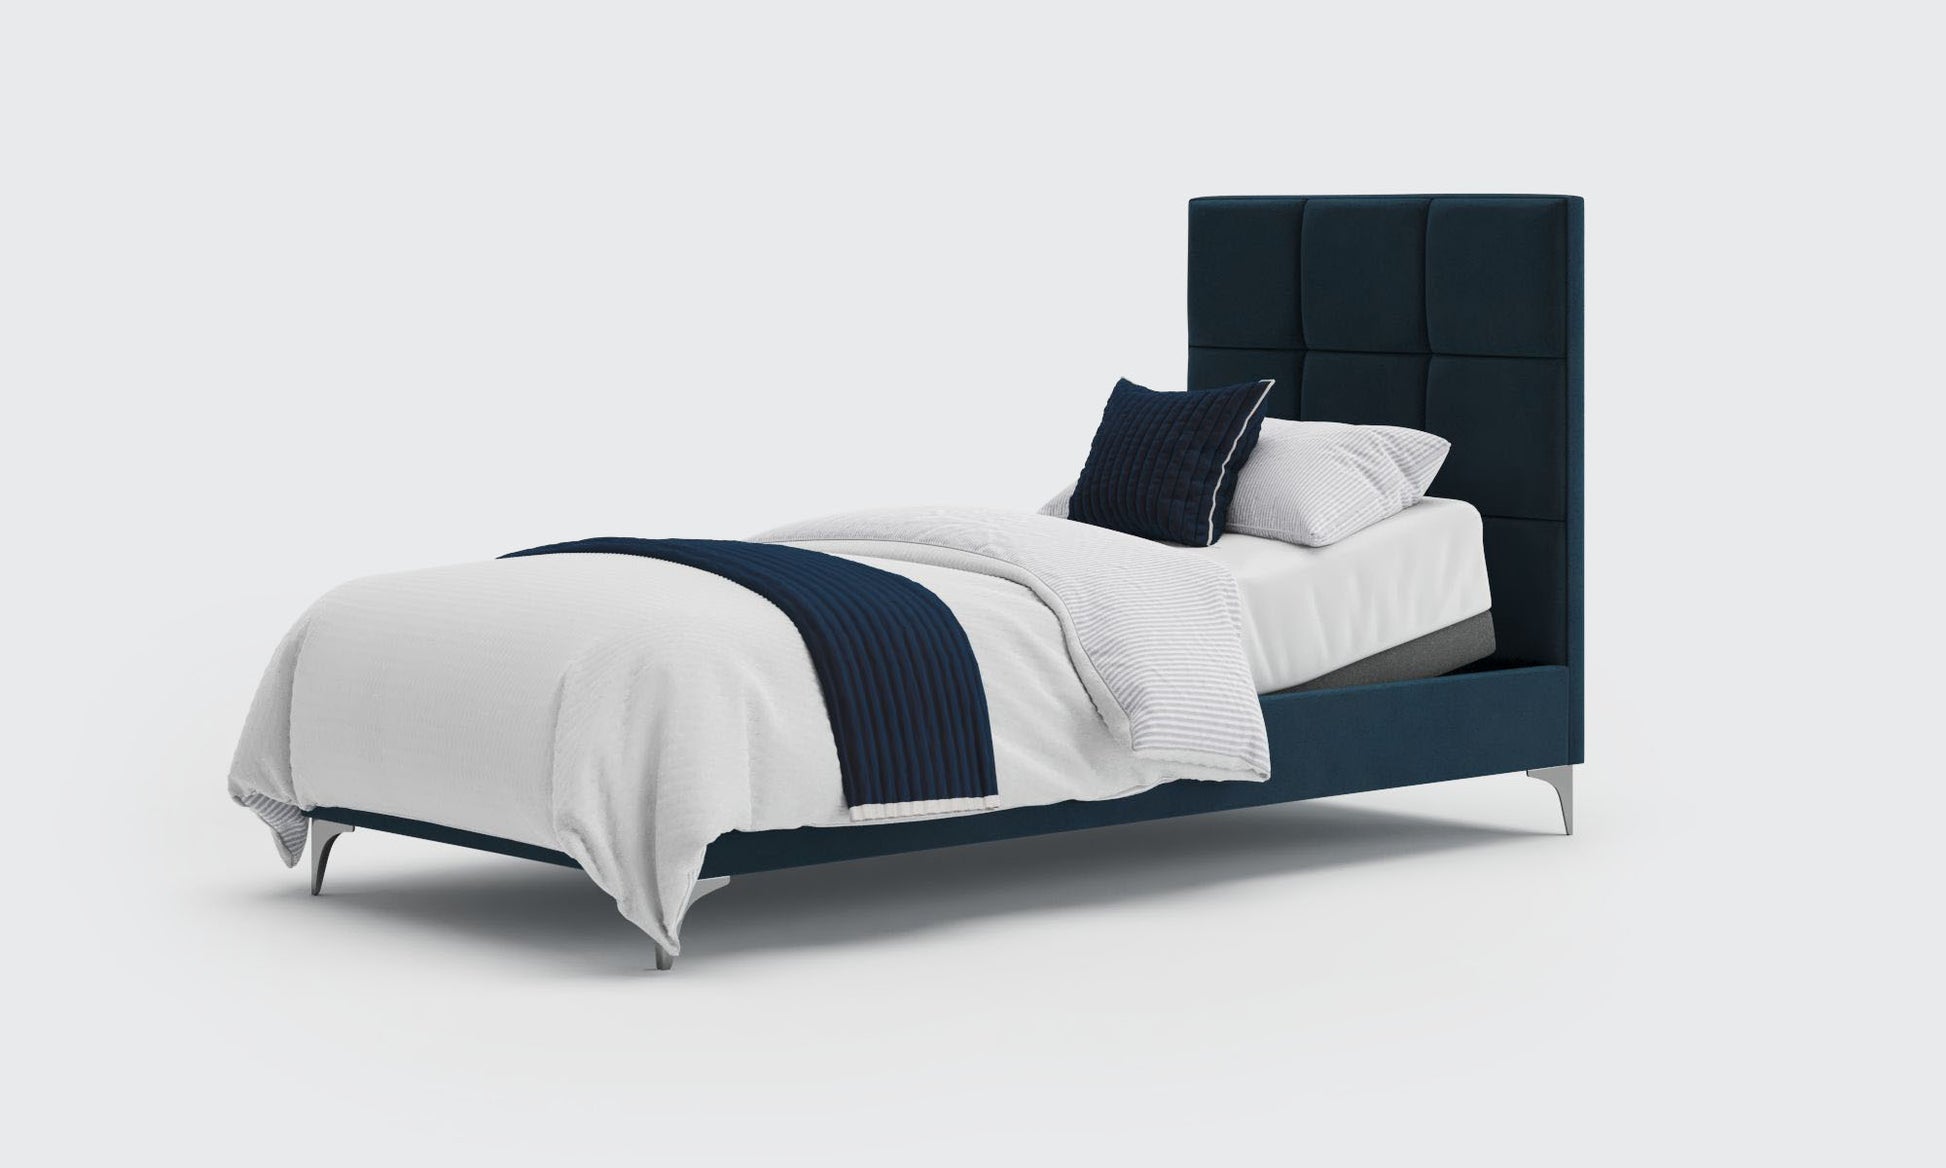 borg 3ft single bed and mattress in the royal velvet material